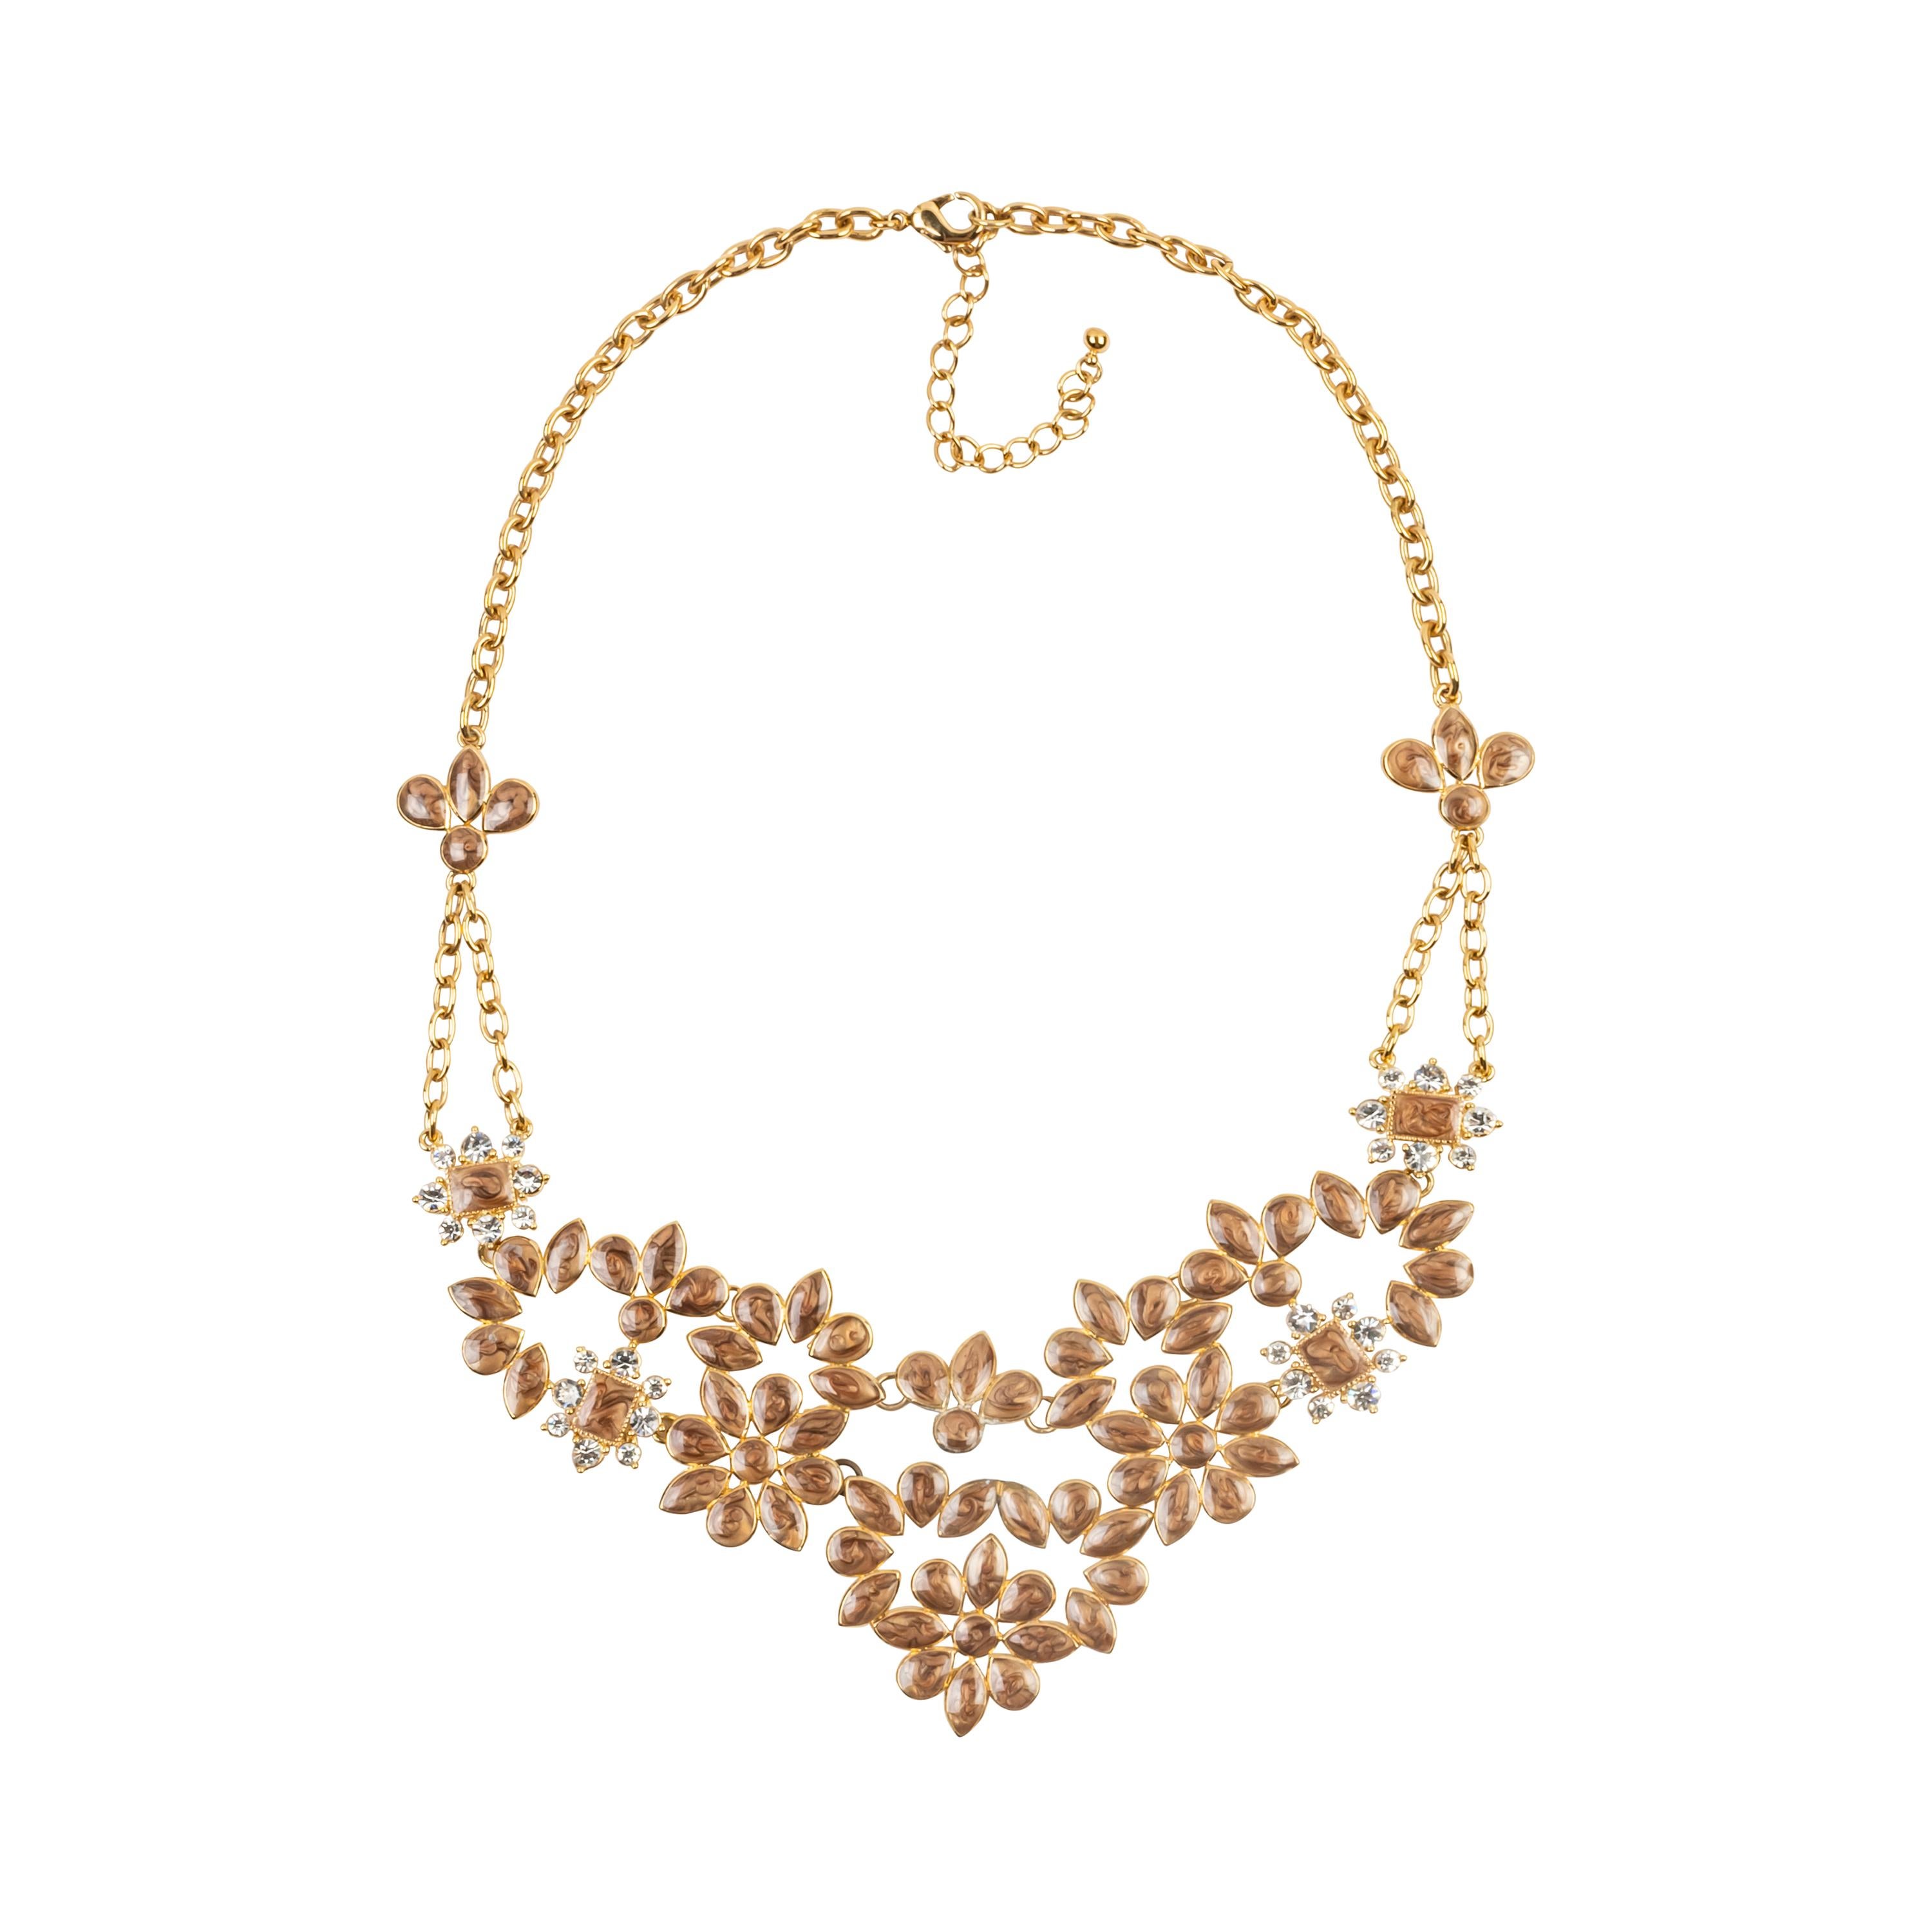 Bochic bijoux retro ball room necklace  In New Condition For Sale In New York, NY